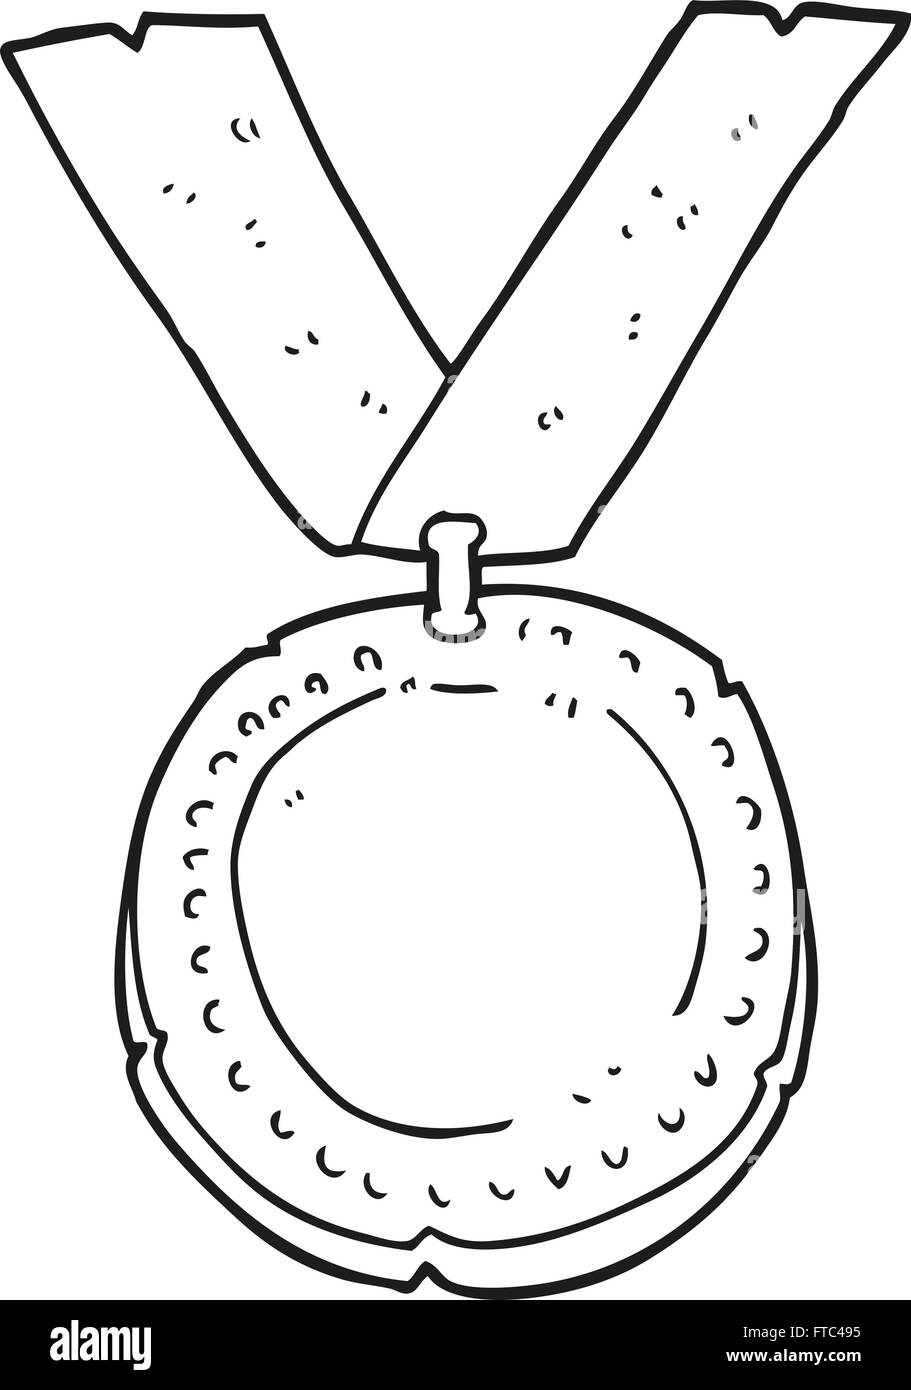 freehand drawn black and white cartoon medal Stock Vector